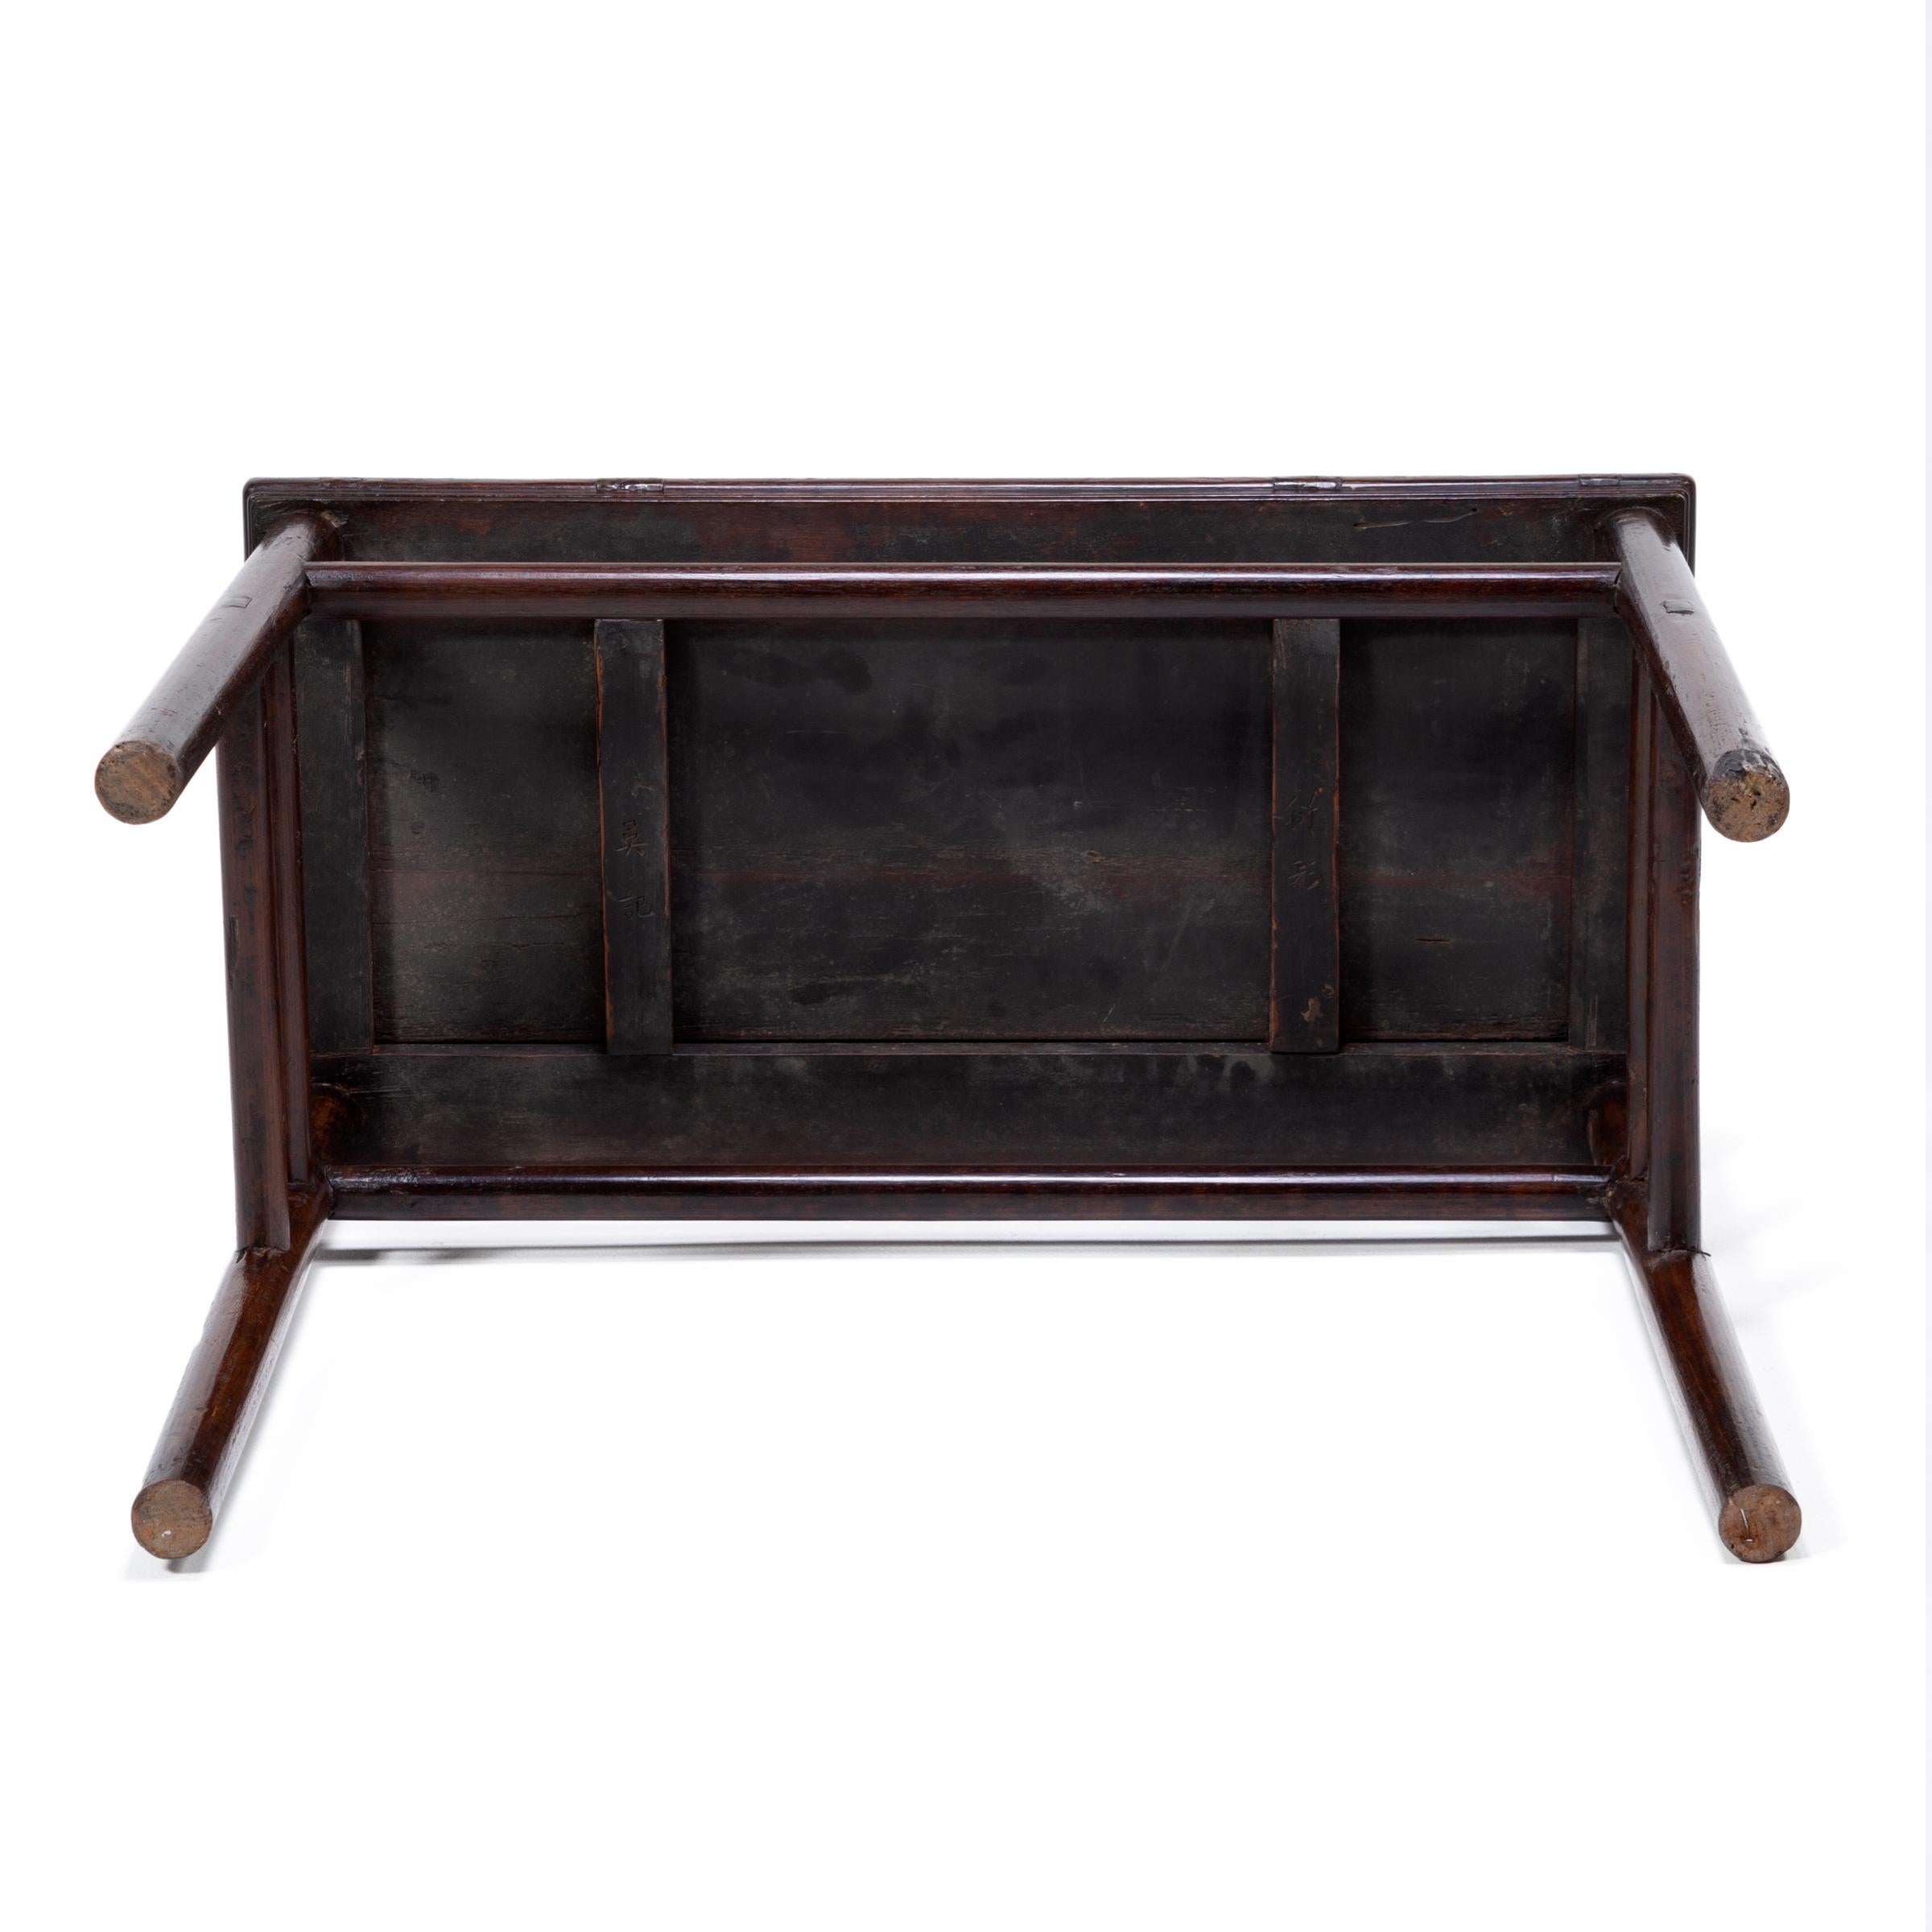 Chinese Wine Table with Simple Stretchers, c. 1700 For Sale 1